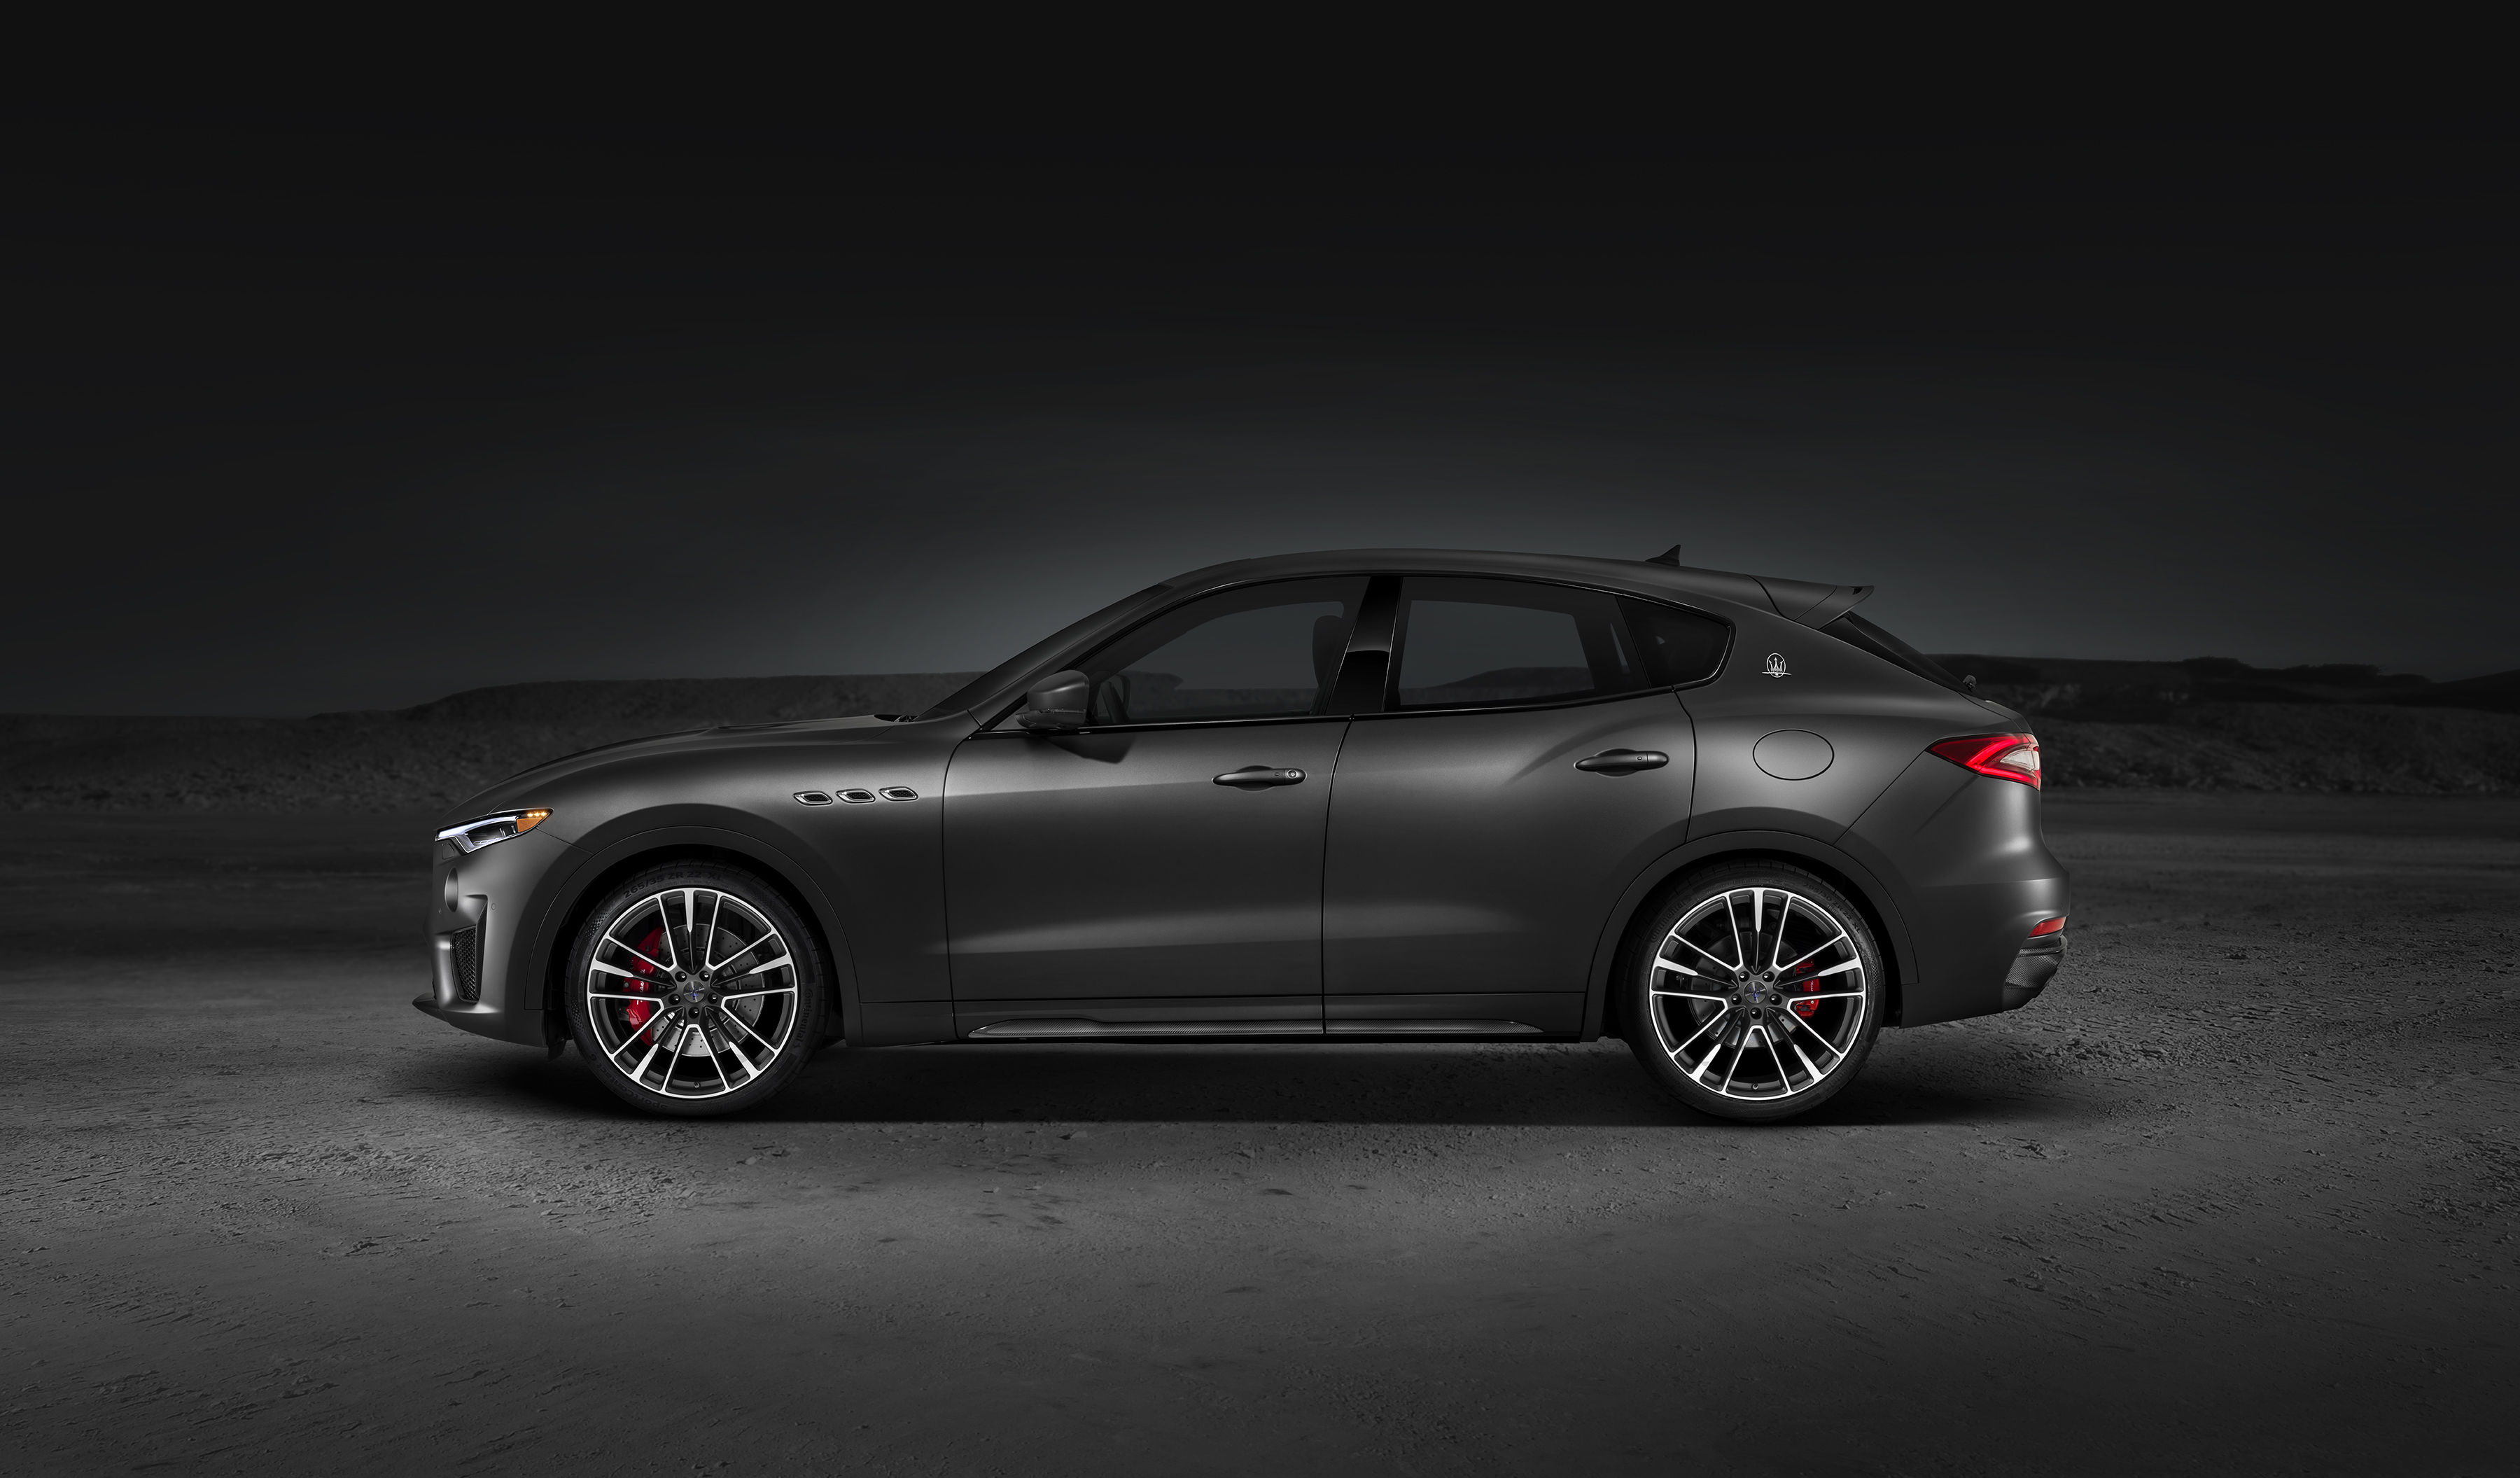 Maserati conceives the Levante Trofeo — one of the fastest and most powerful SUVs ever